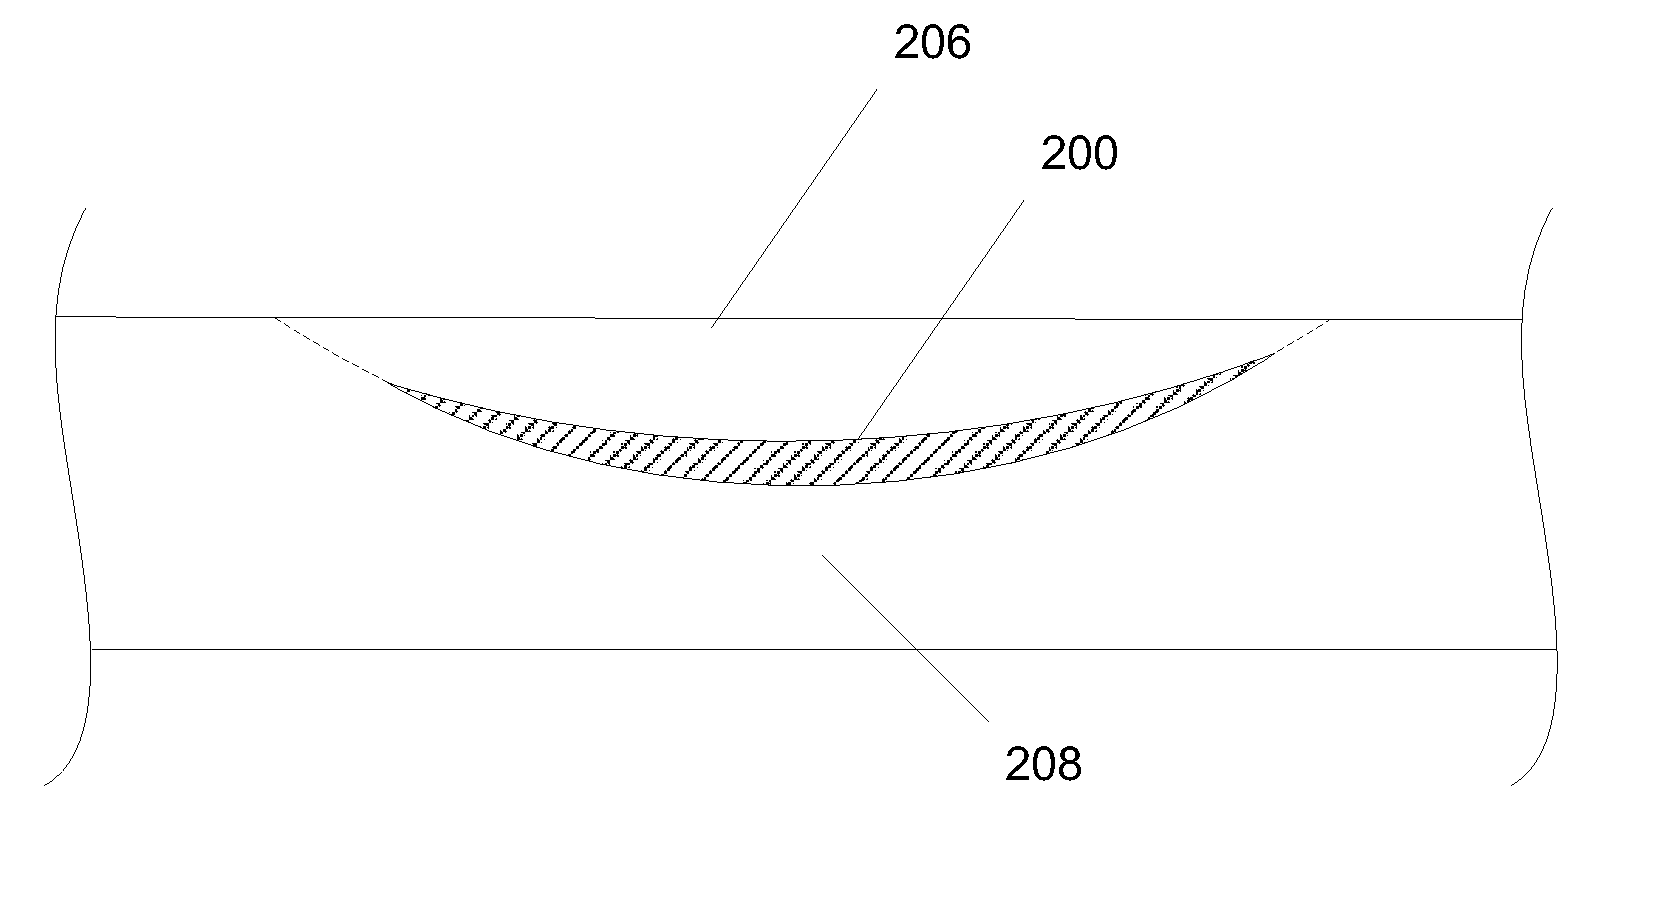 Process for manufacture of a thermochromic contact lens material